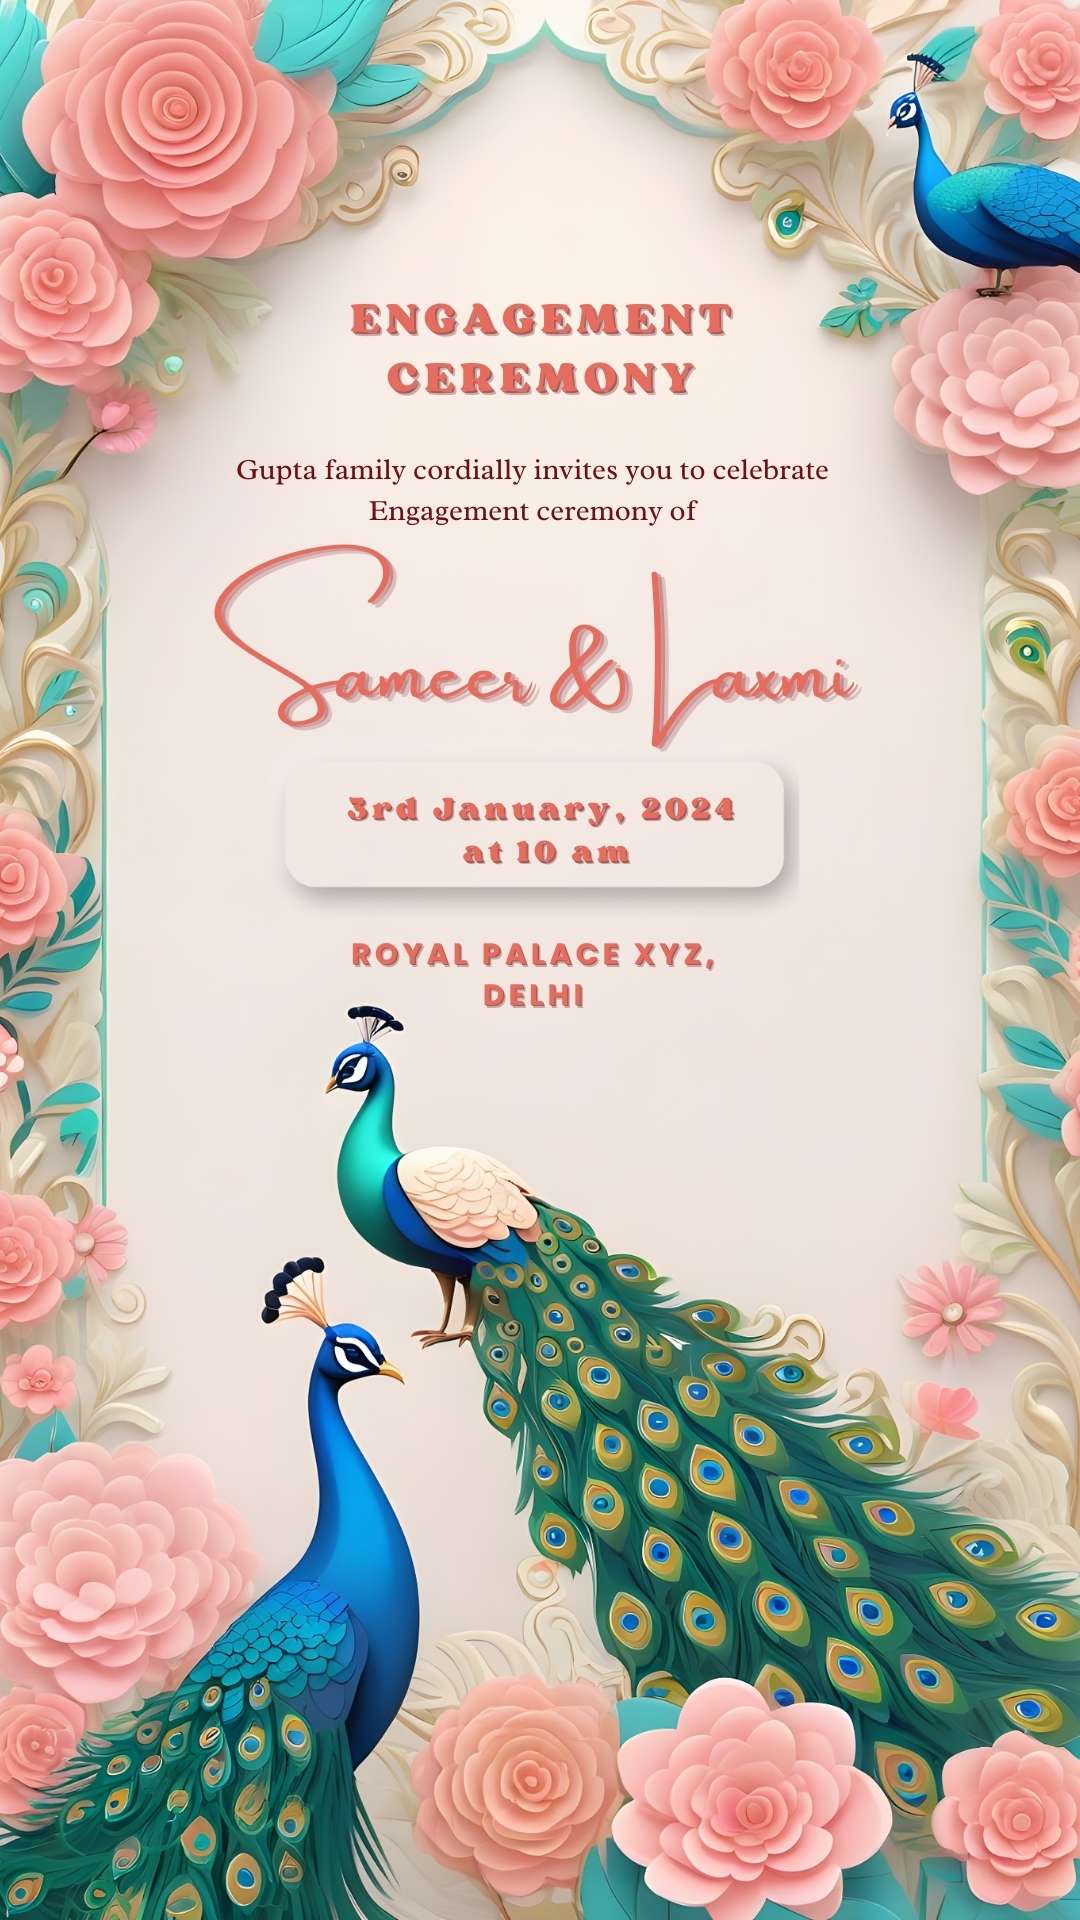 Engagement ceremony invitation with peacock